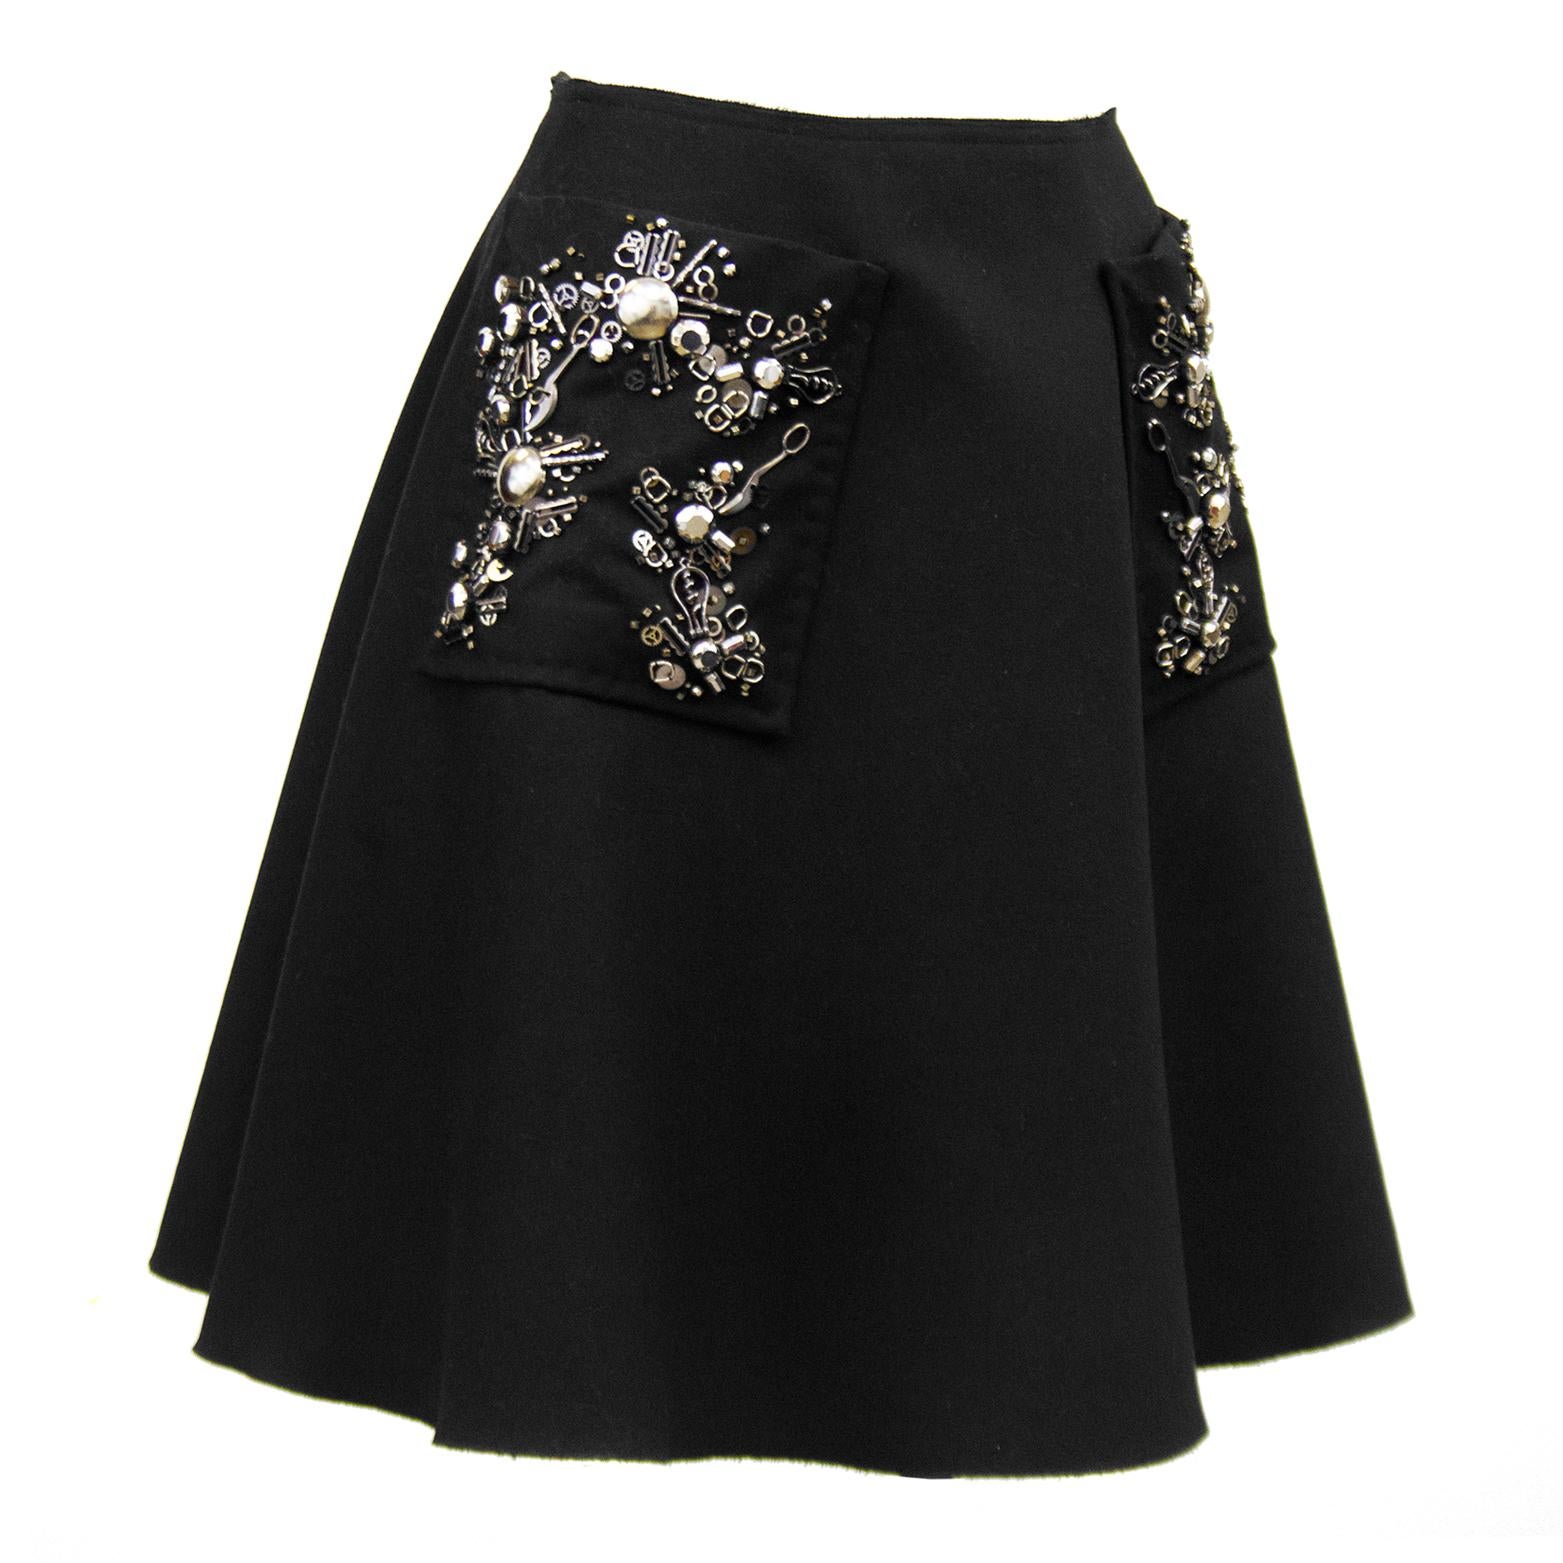 Prada black wool high waisted full A-line skirt from the early 2000's. Large patch pockets with classic silver and black Prada beaded embellishment and raw hem. Invisible zipper up centre back seam. Perfect with a black turtleneck, black tights and